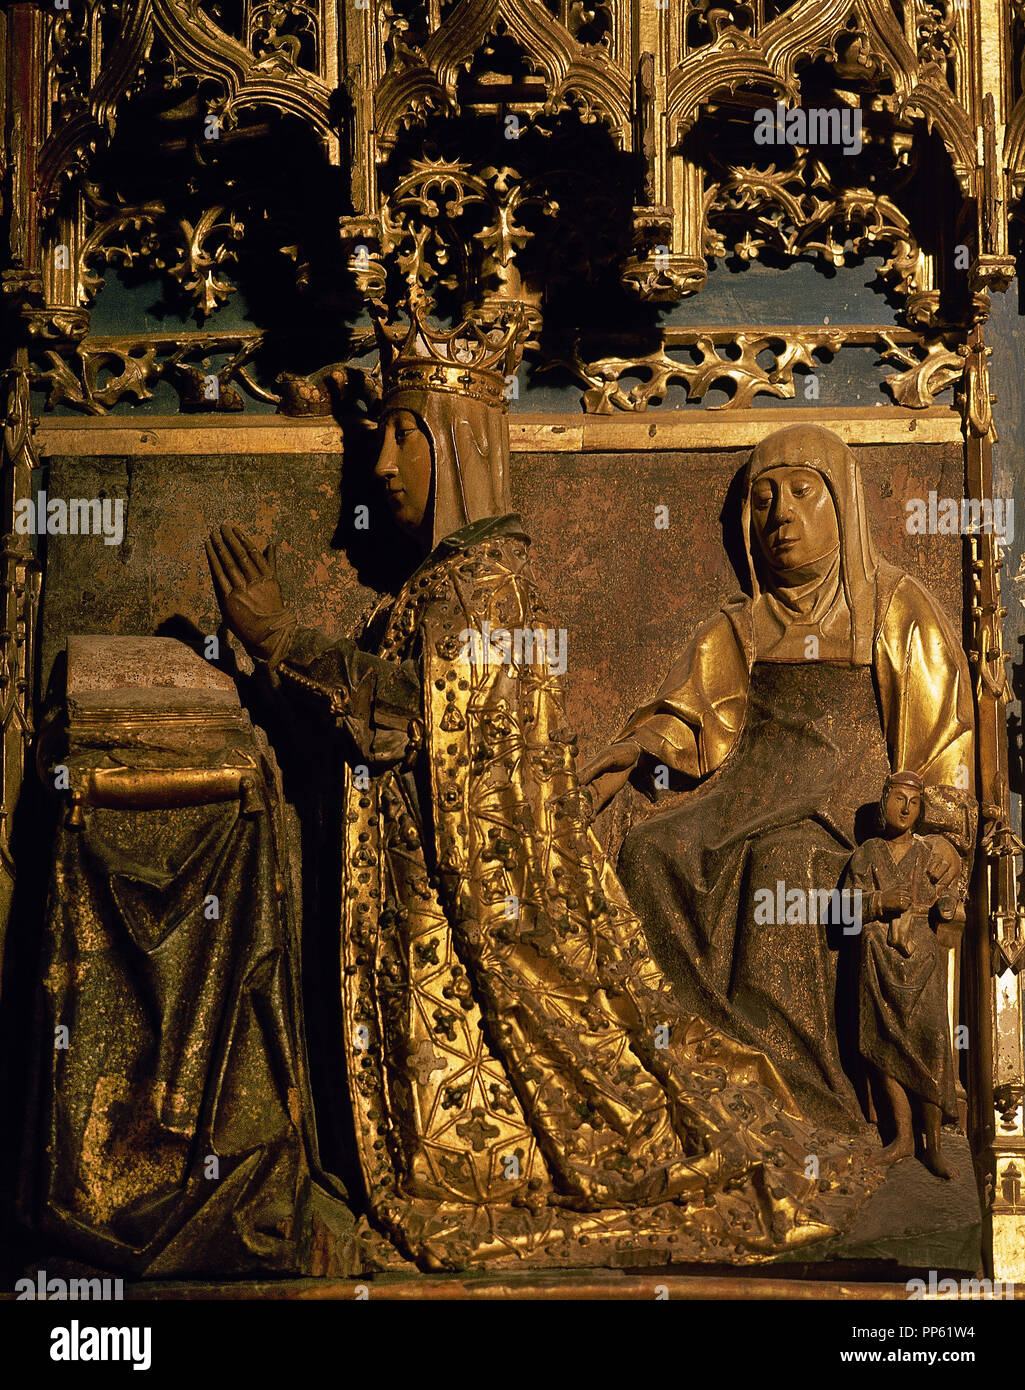 Spain. Castile and Leon. Burgos. MIraflores Charterhouse. Altarpiece which  was carved in 1496-1499 by Castilian sculptor of Flemish origin Gil de Siloe (1440-1501), and polychromed and gilded by Diego de la Cruz (1482-1500), a Flemish origin painter.  Detail of Isabel of Portugal, queen consort of Castile, 1447-1454, praying and protected by her patron Saint ( St. Elizabeth). Stock Photo